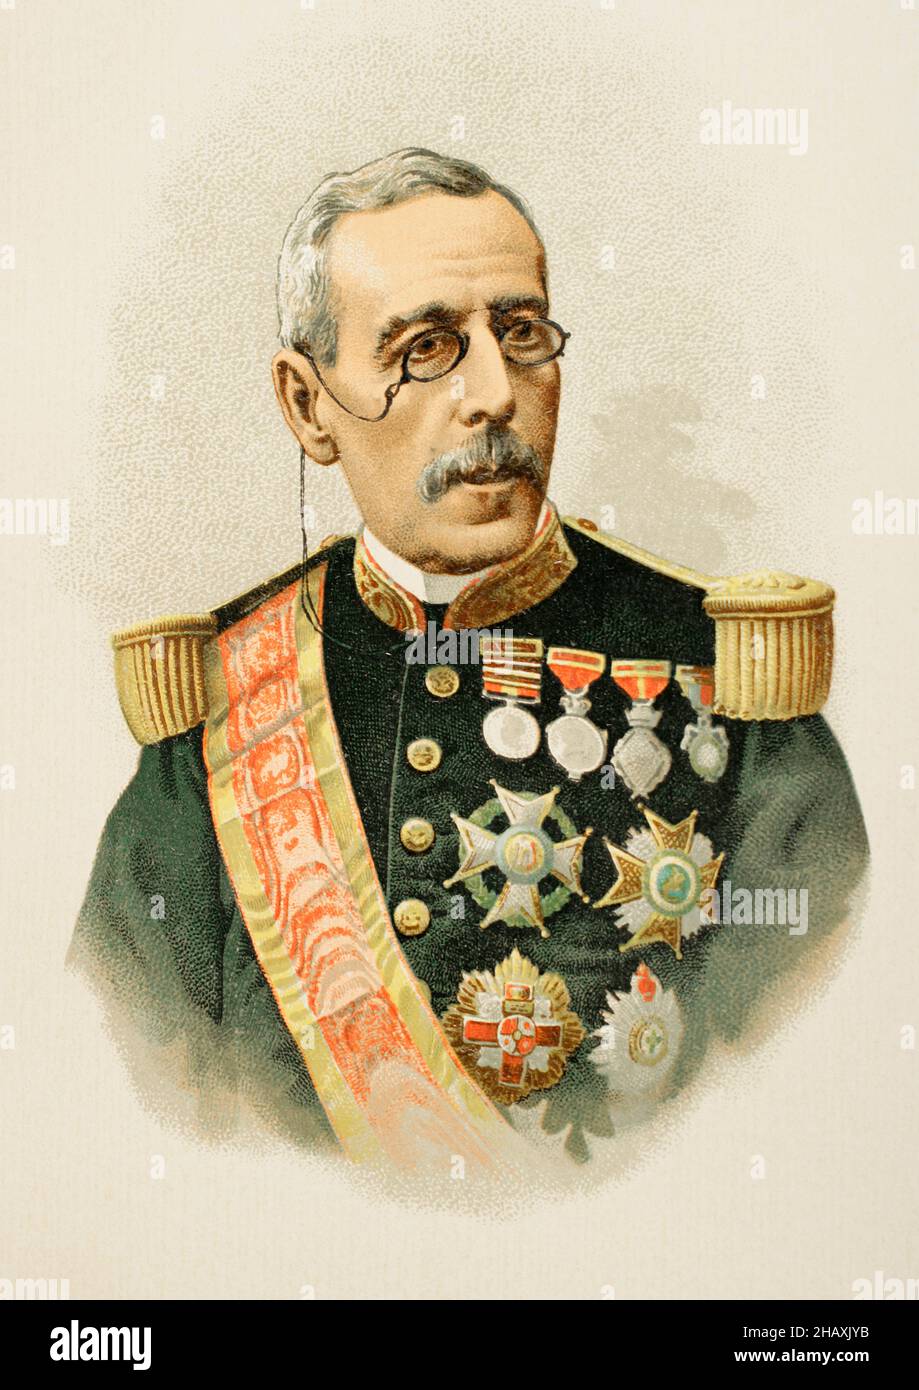 Joaquín Jovellar y Soler (1818-1892). Spanish general and politician. President of the Spanish government in 1875. Governor and Captain General of Cuba (1873-1874, 1876-1878). Governor-General of the Philippines from 1883 to 1885. Portrait. Chromolithography. 'Historia General de España (General History of Spain), by Miguel Morayta. Volume IX. Madrid, 1896. Stock Photo